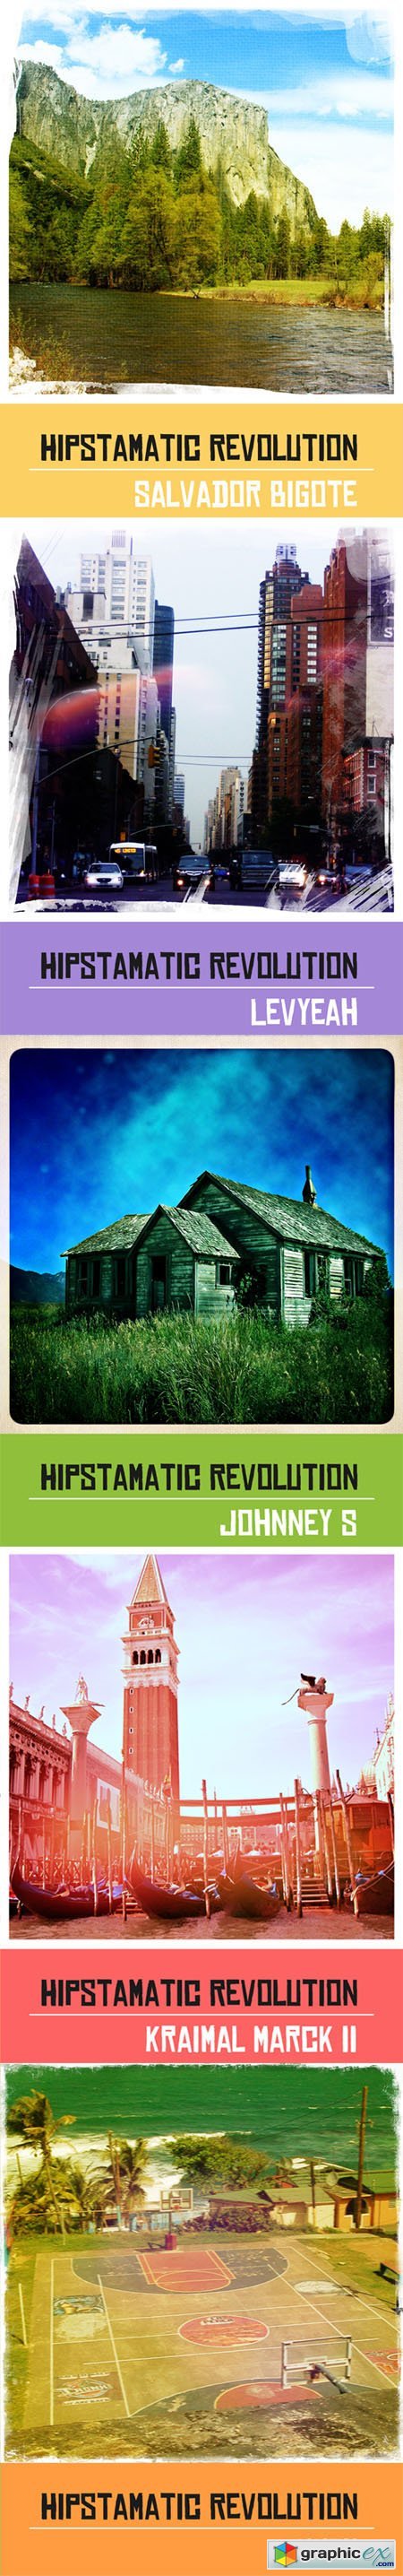 HipstaRev - Photoshop Actions Pack - Lens, Film and Flash Effects